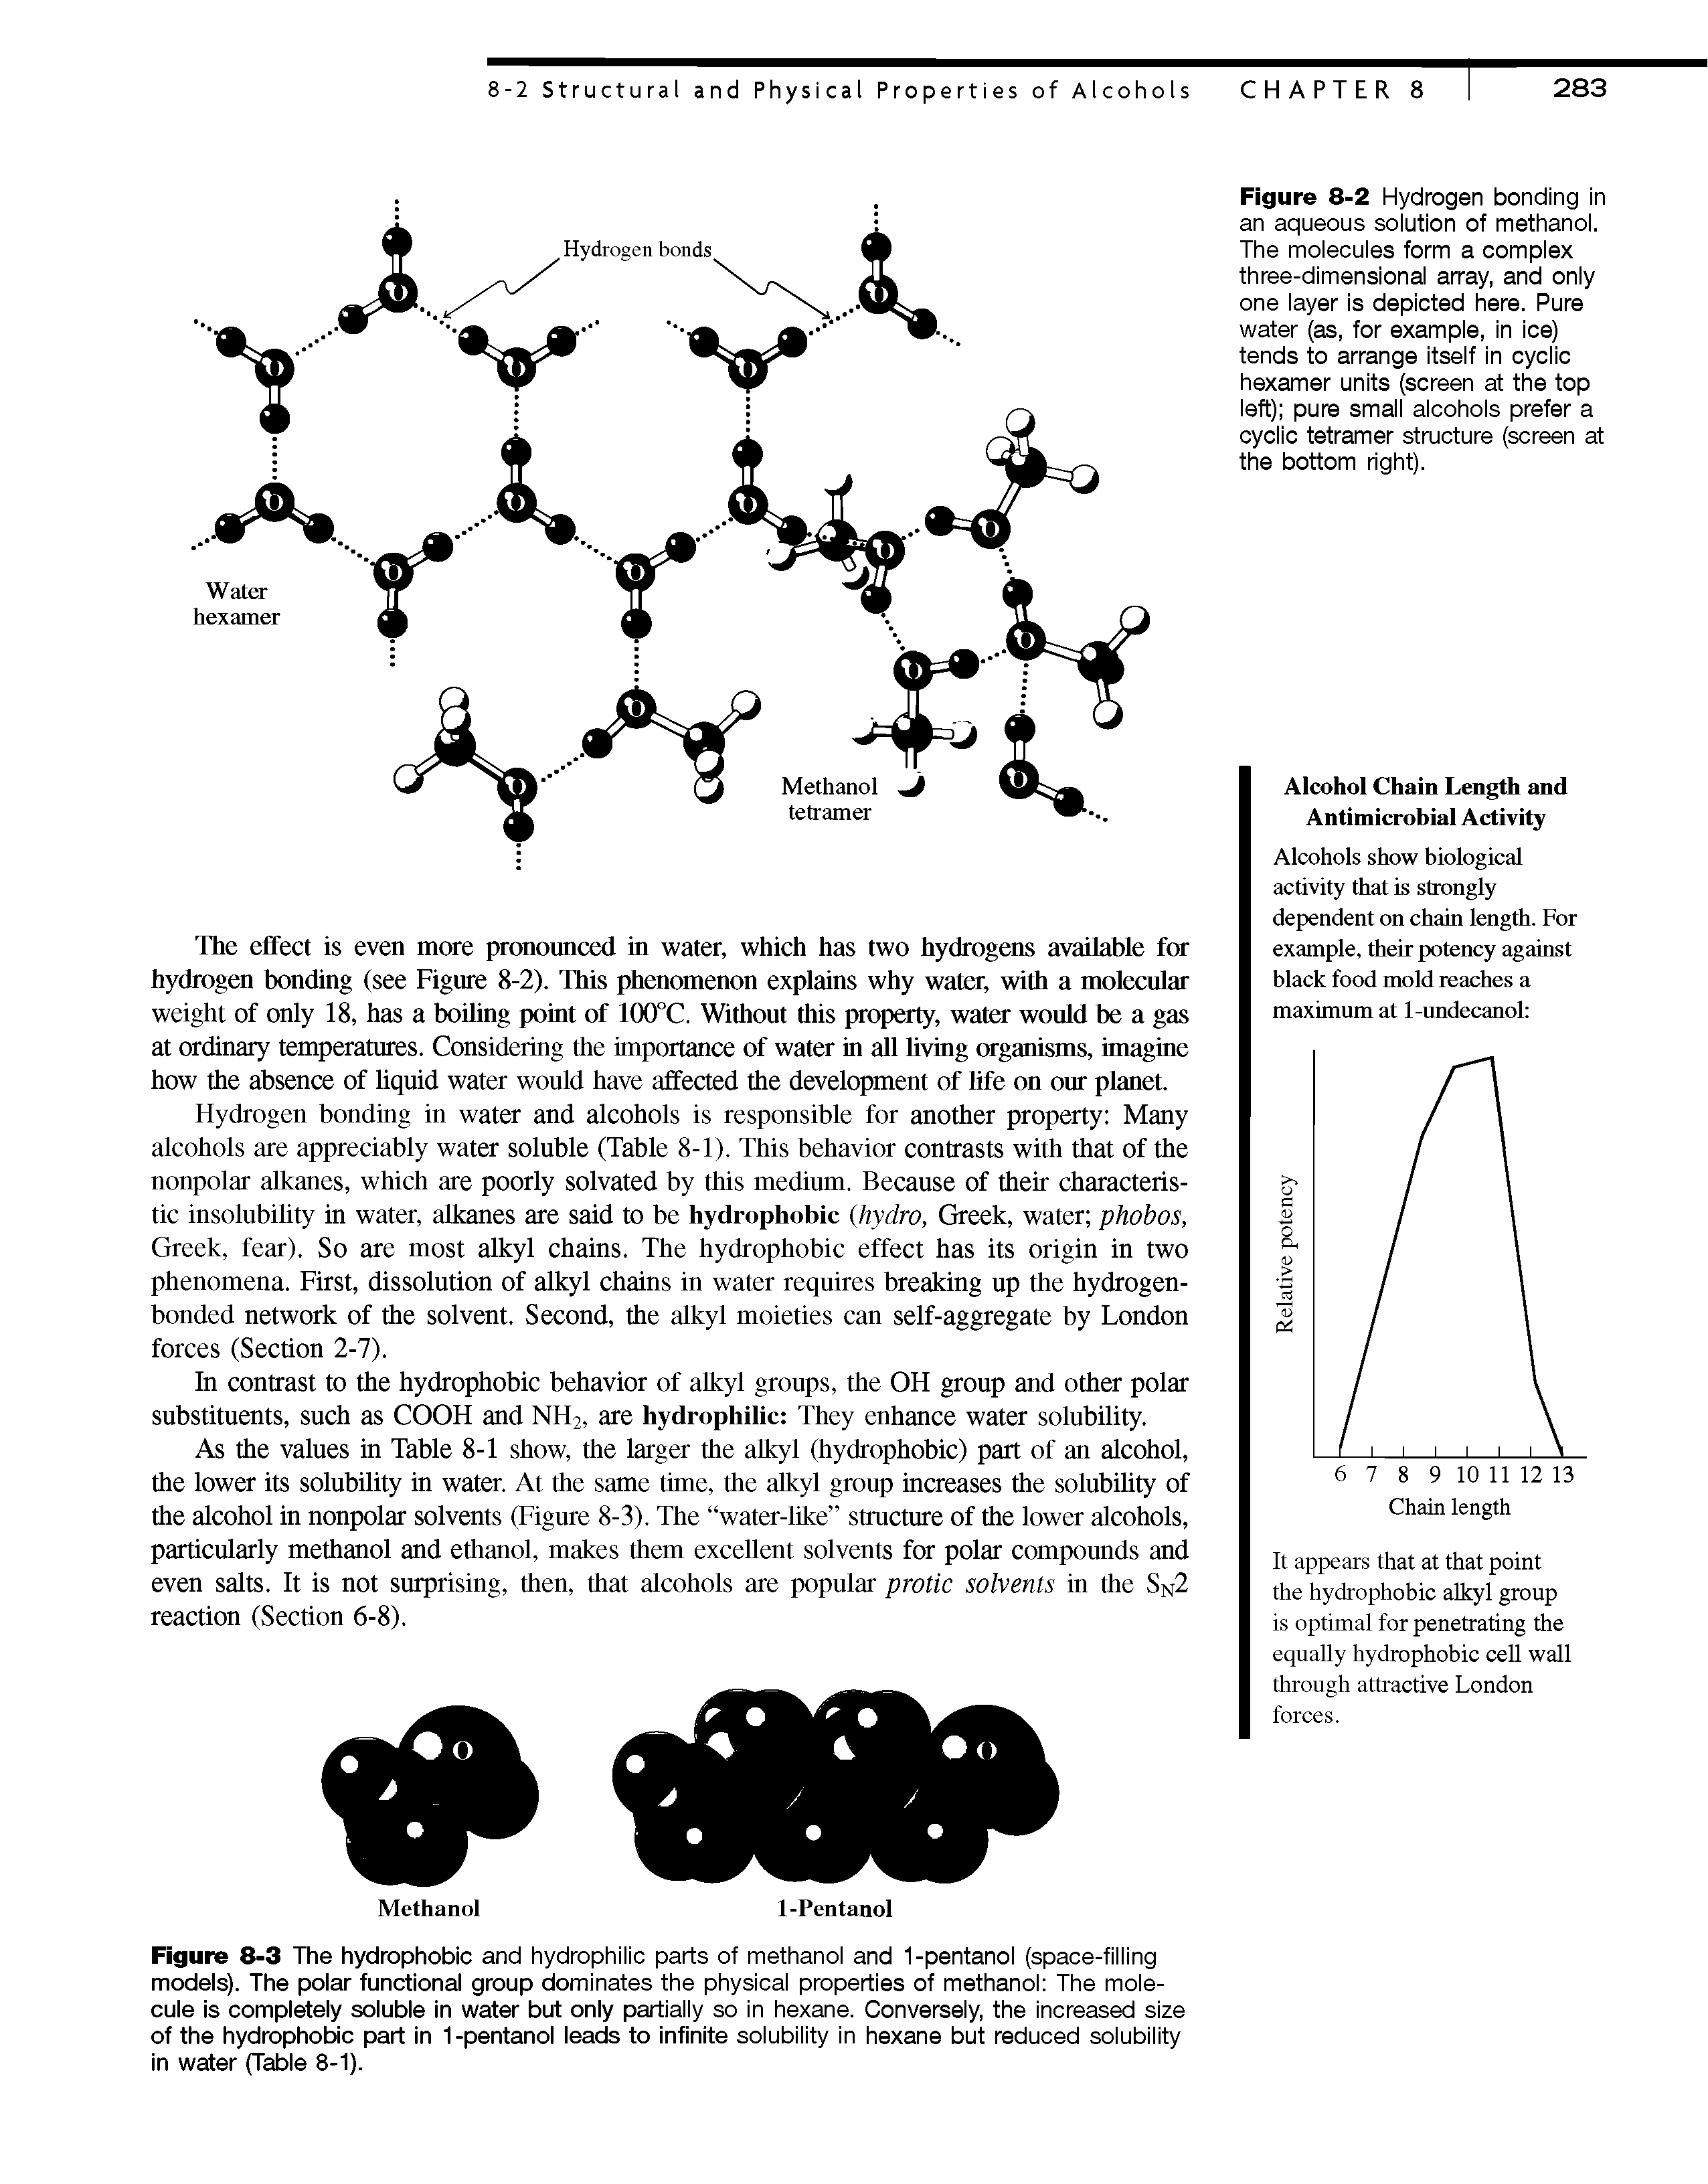 Figure 8-3 The hydrophobic and hydrophilic parts of methanol and 1-pentanol (space-filling modeis). The poiar functionai group dominates the physical properties of methanol The molecule is completely soluble in water but only partially so in hexane. Conversely, the increased size of the hydrophobic part in 1-pentanol leads to infinite solubility in hexane but reduced solubility in water (Table 8-1).